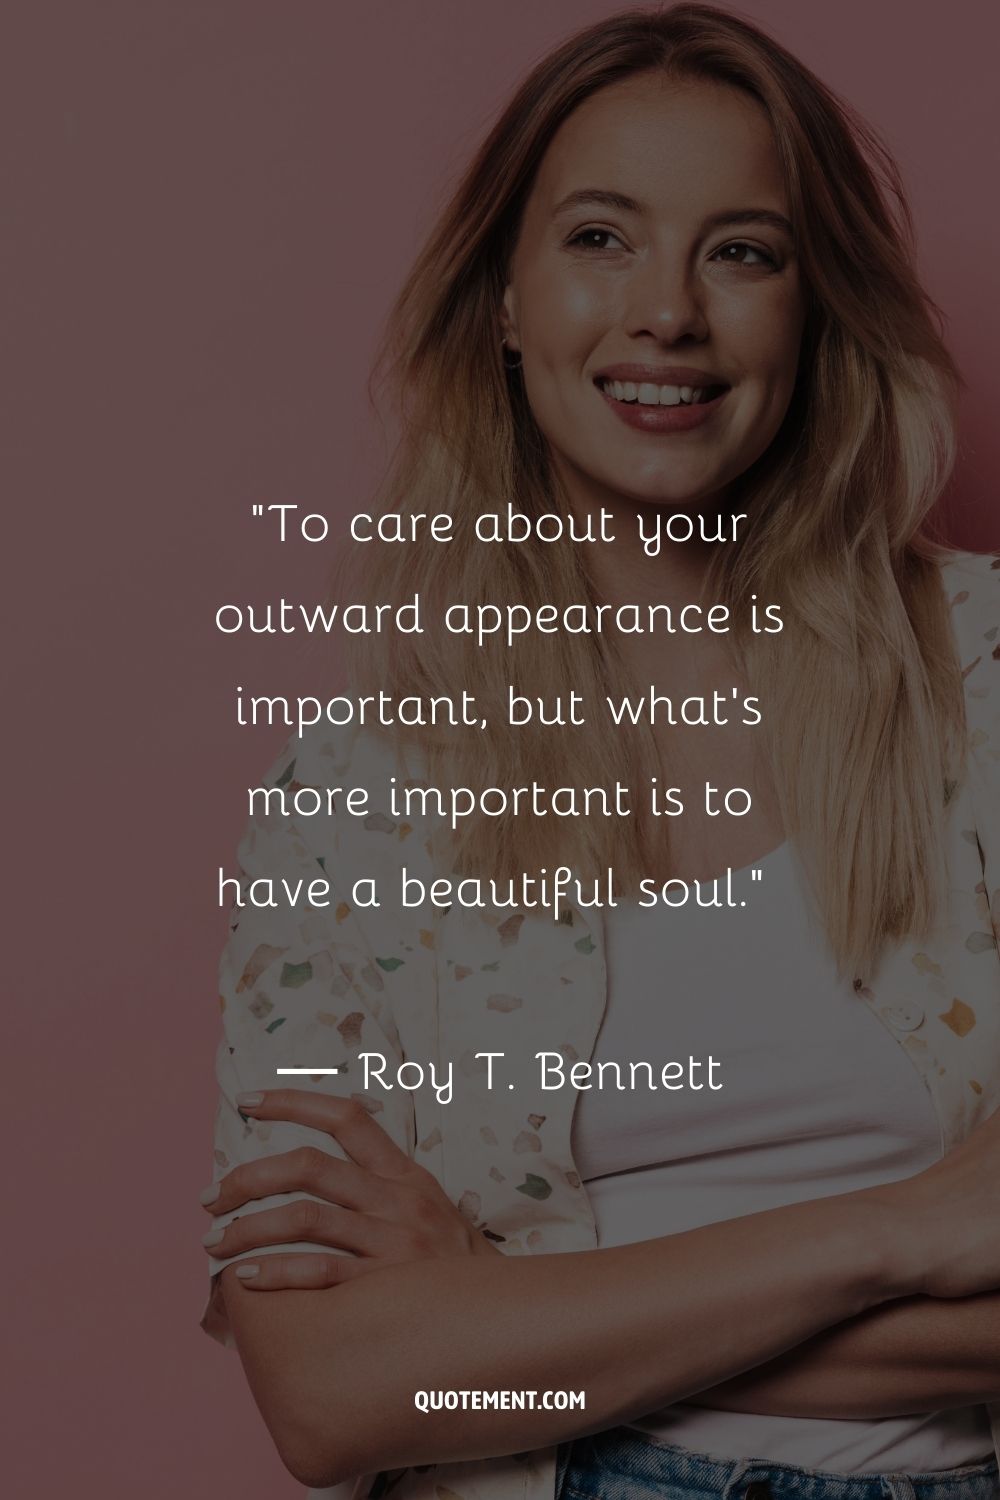 To care about your outward appearance is important, but what’s more important is to have a beautiful soul